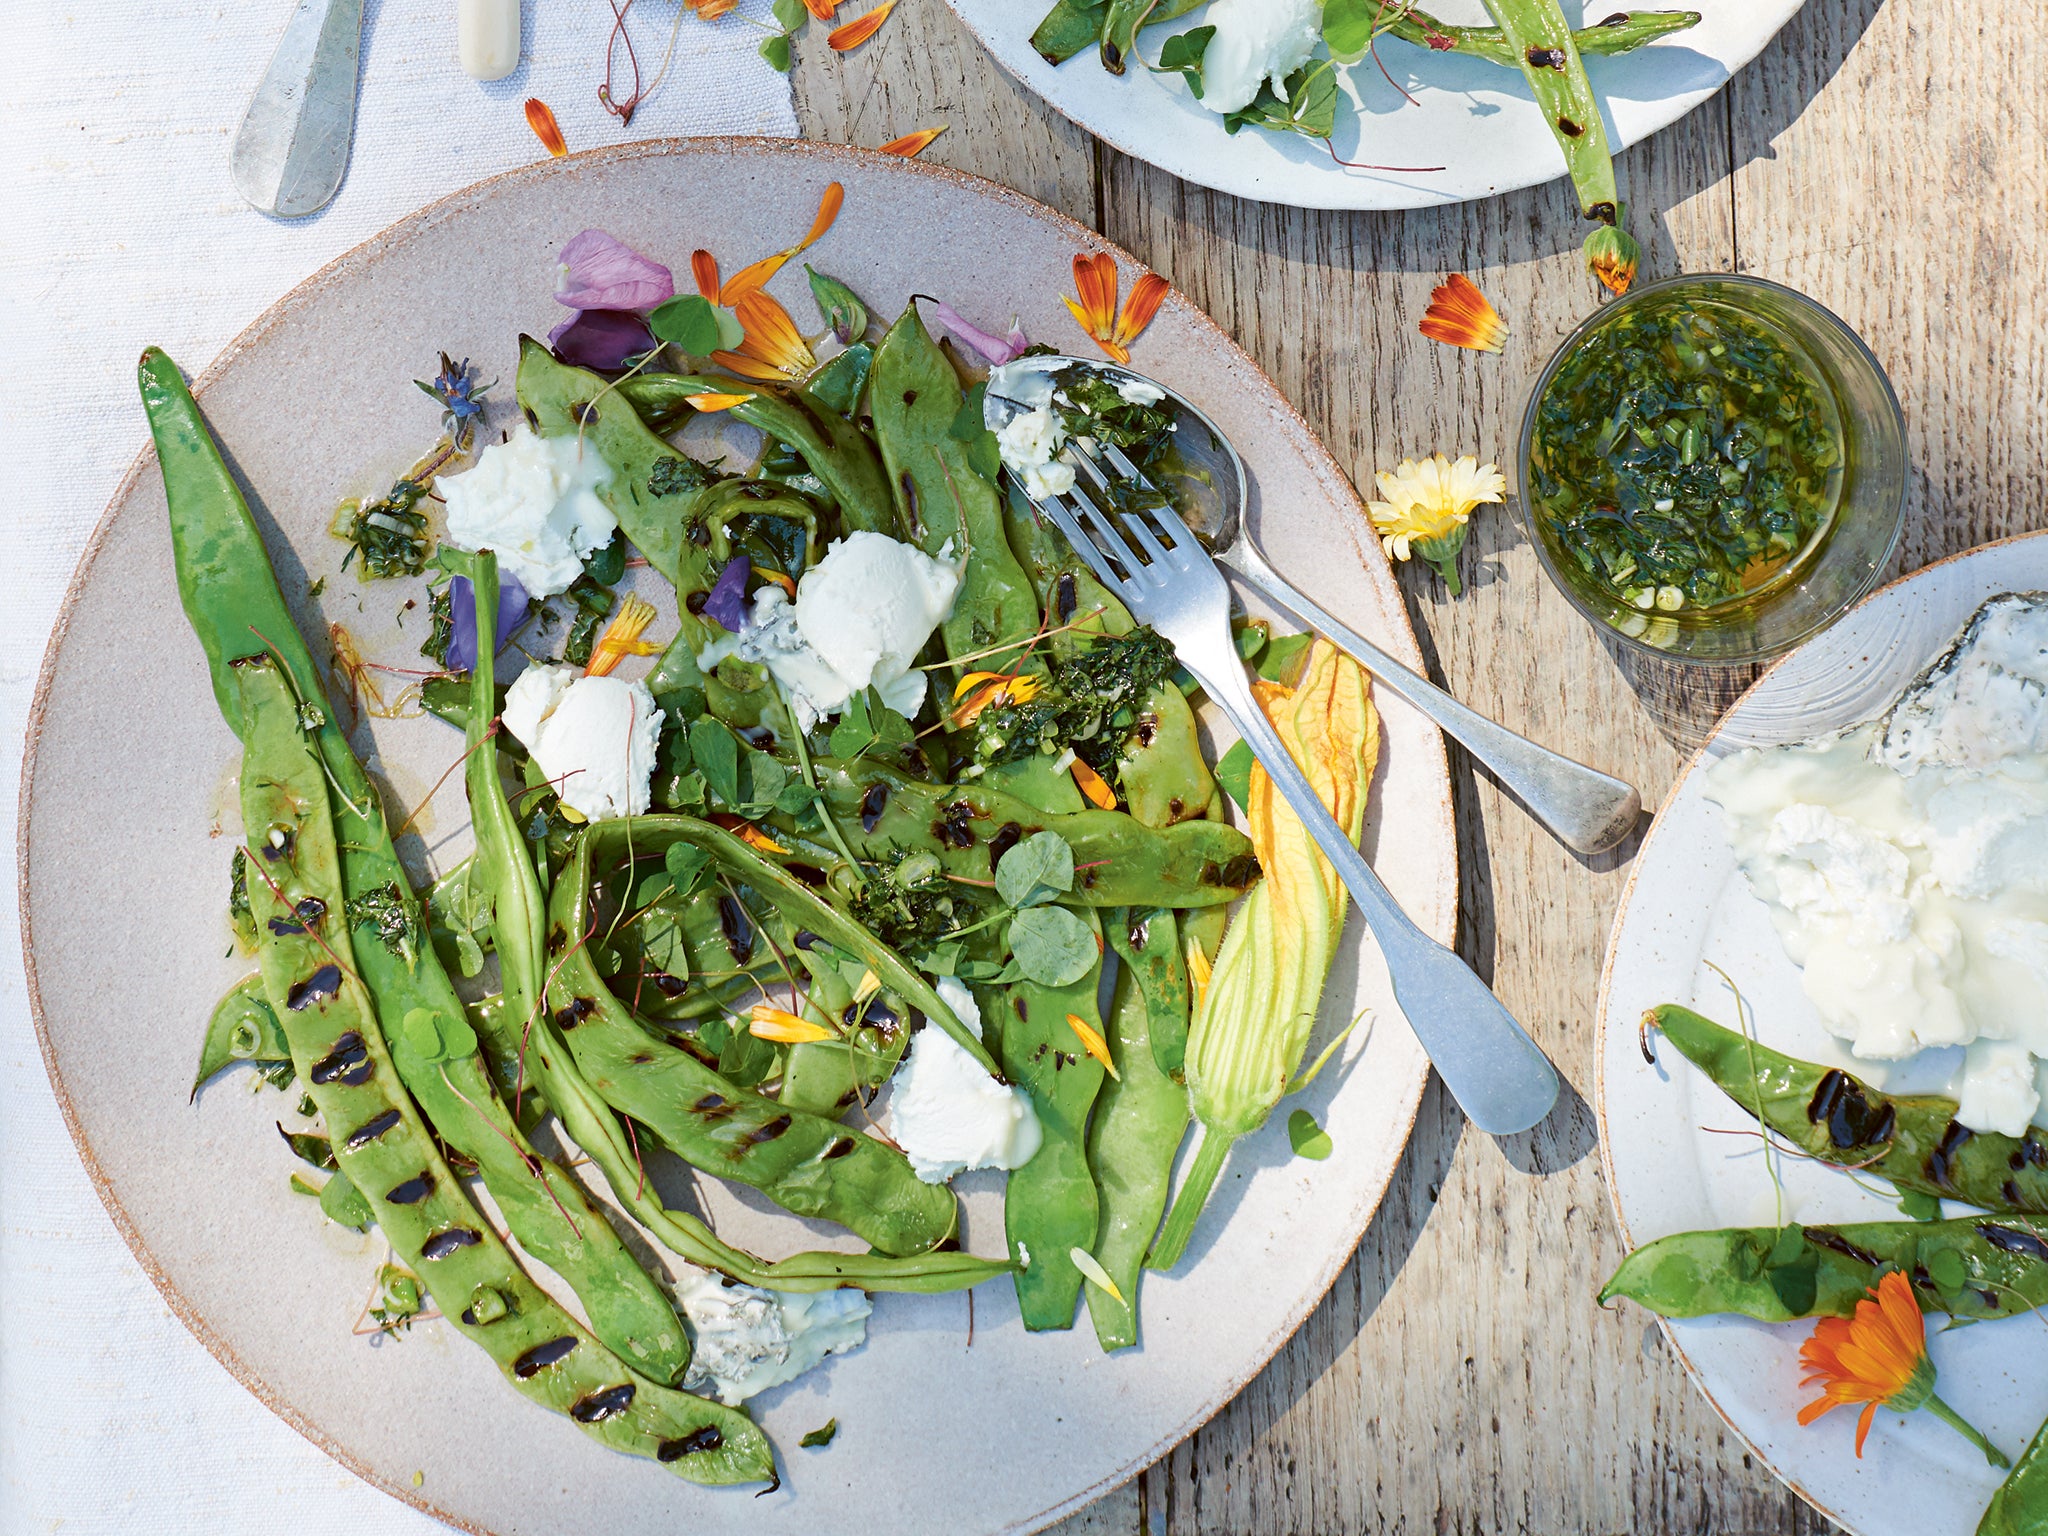 This griddled helda bean dish has got lazy summer lunch written all over it